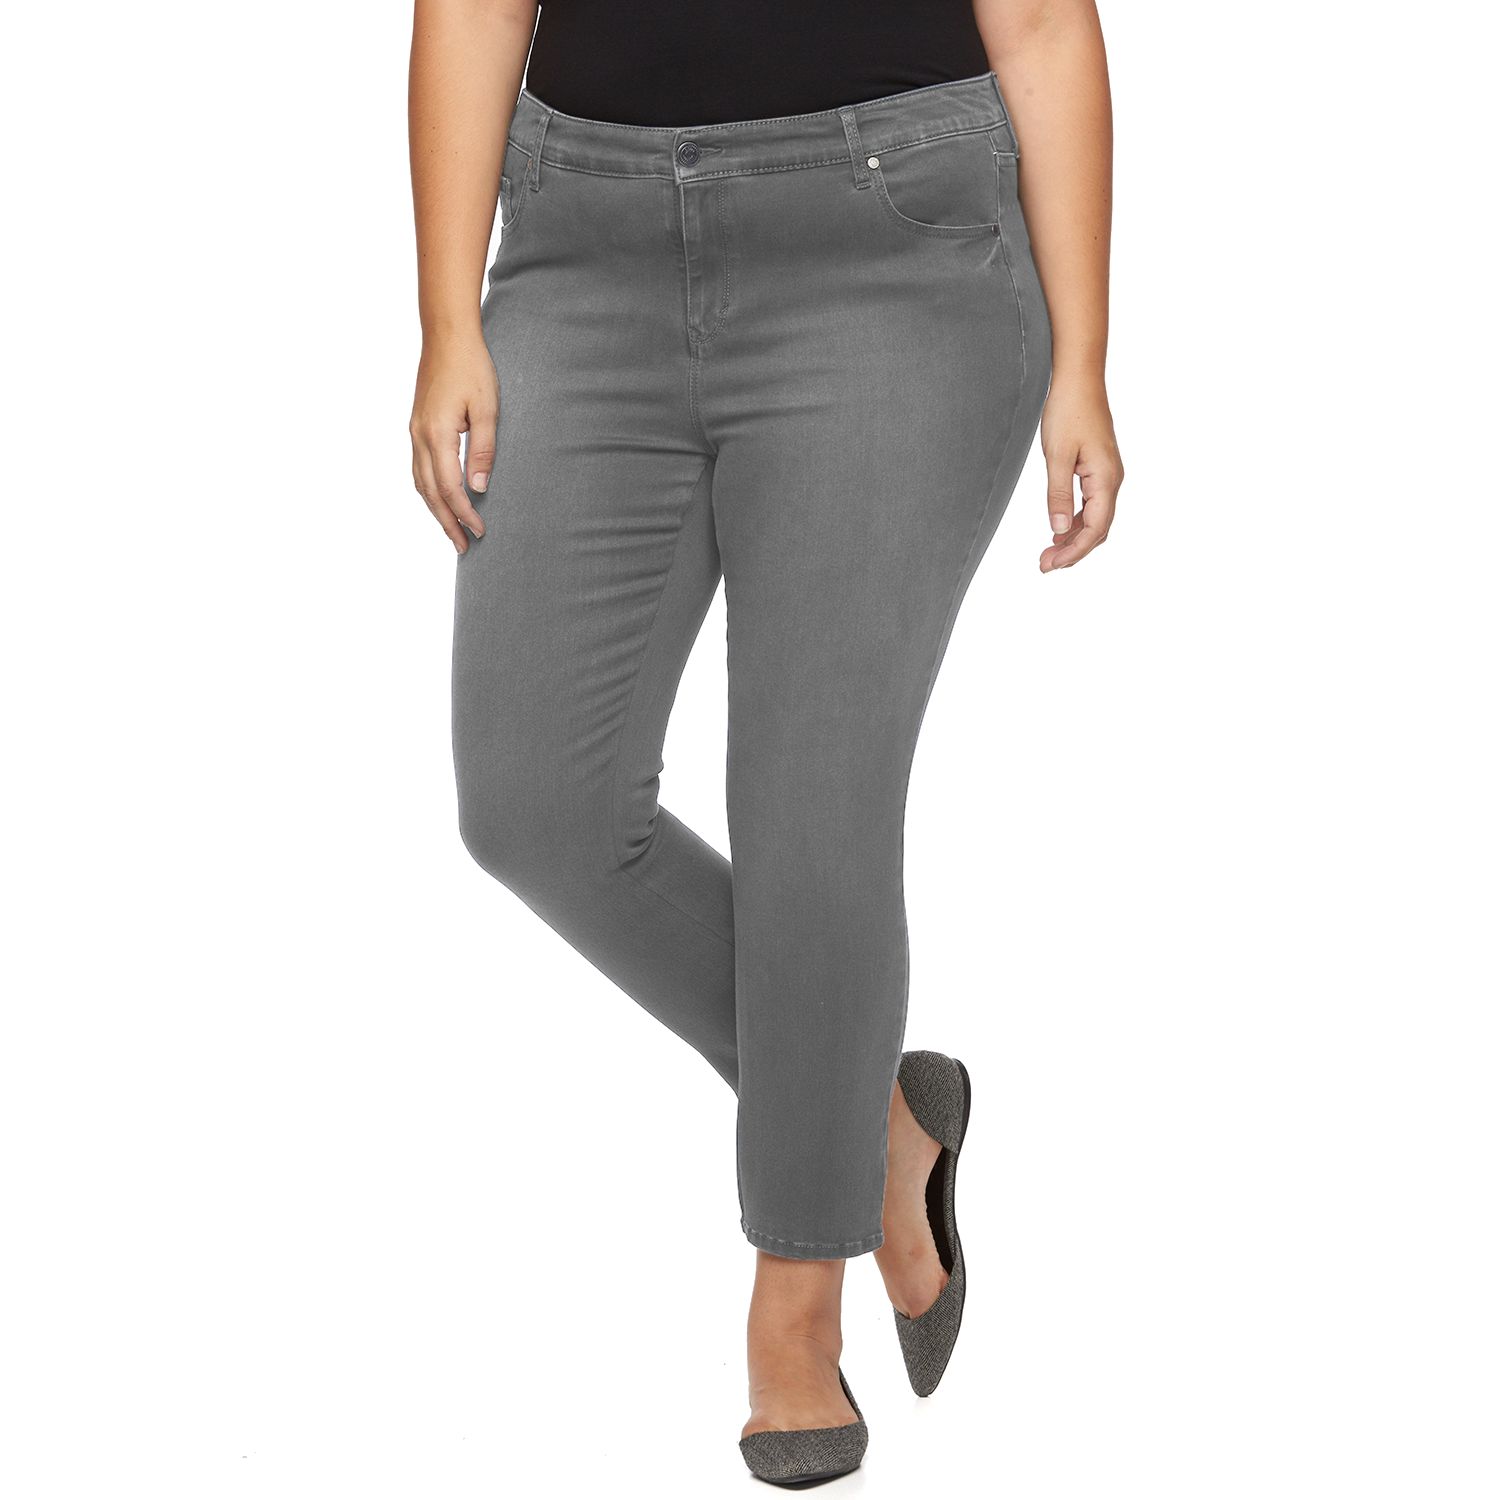 all around slimming effect pants